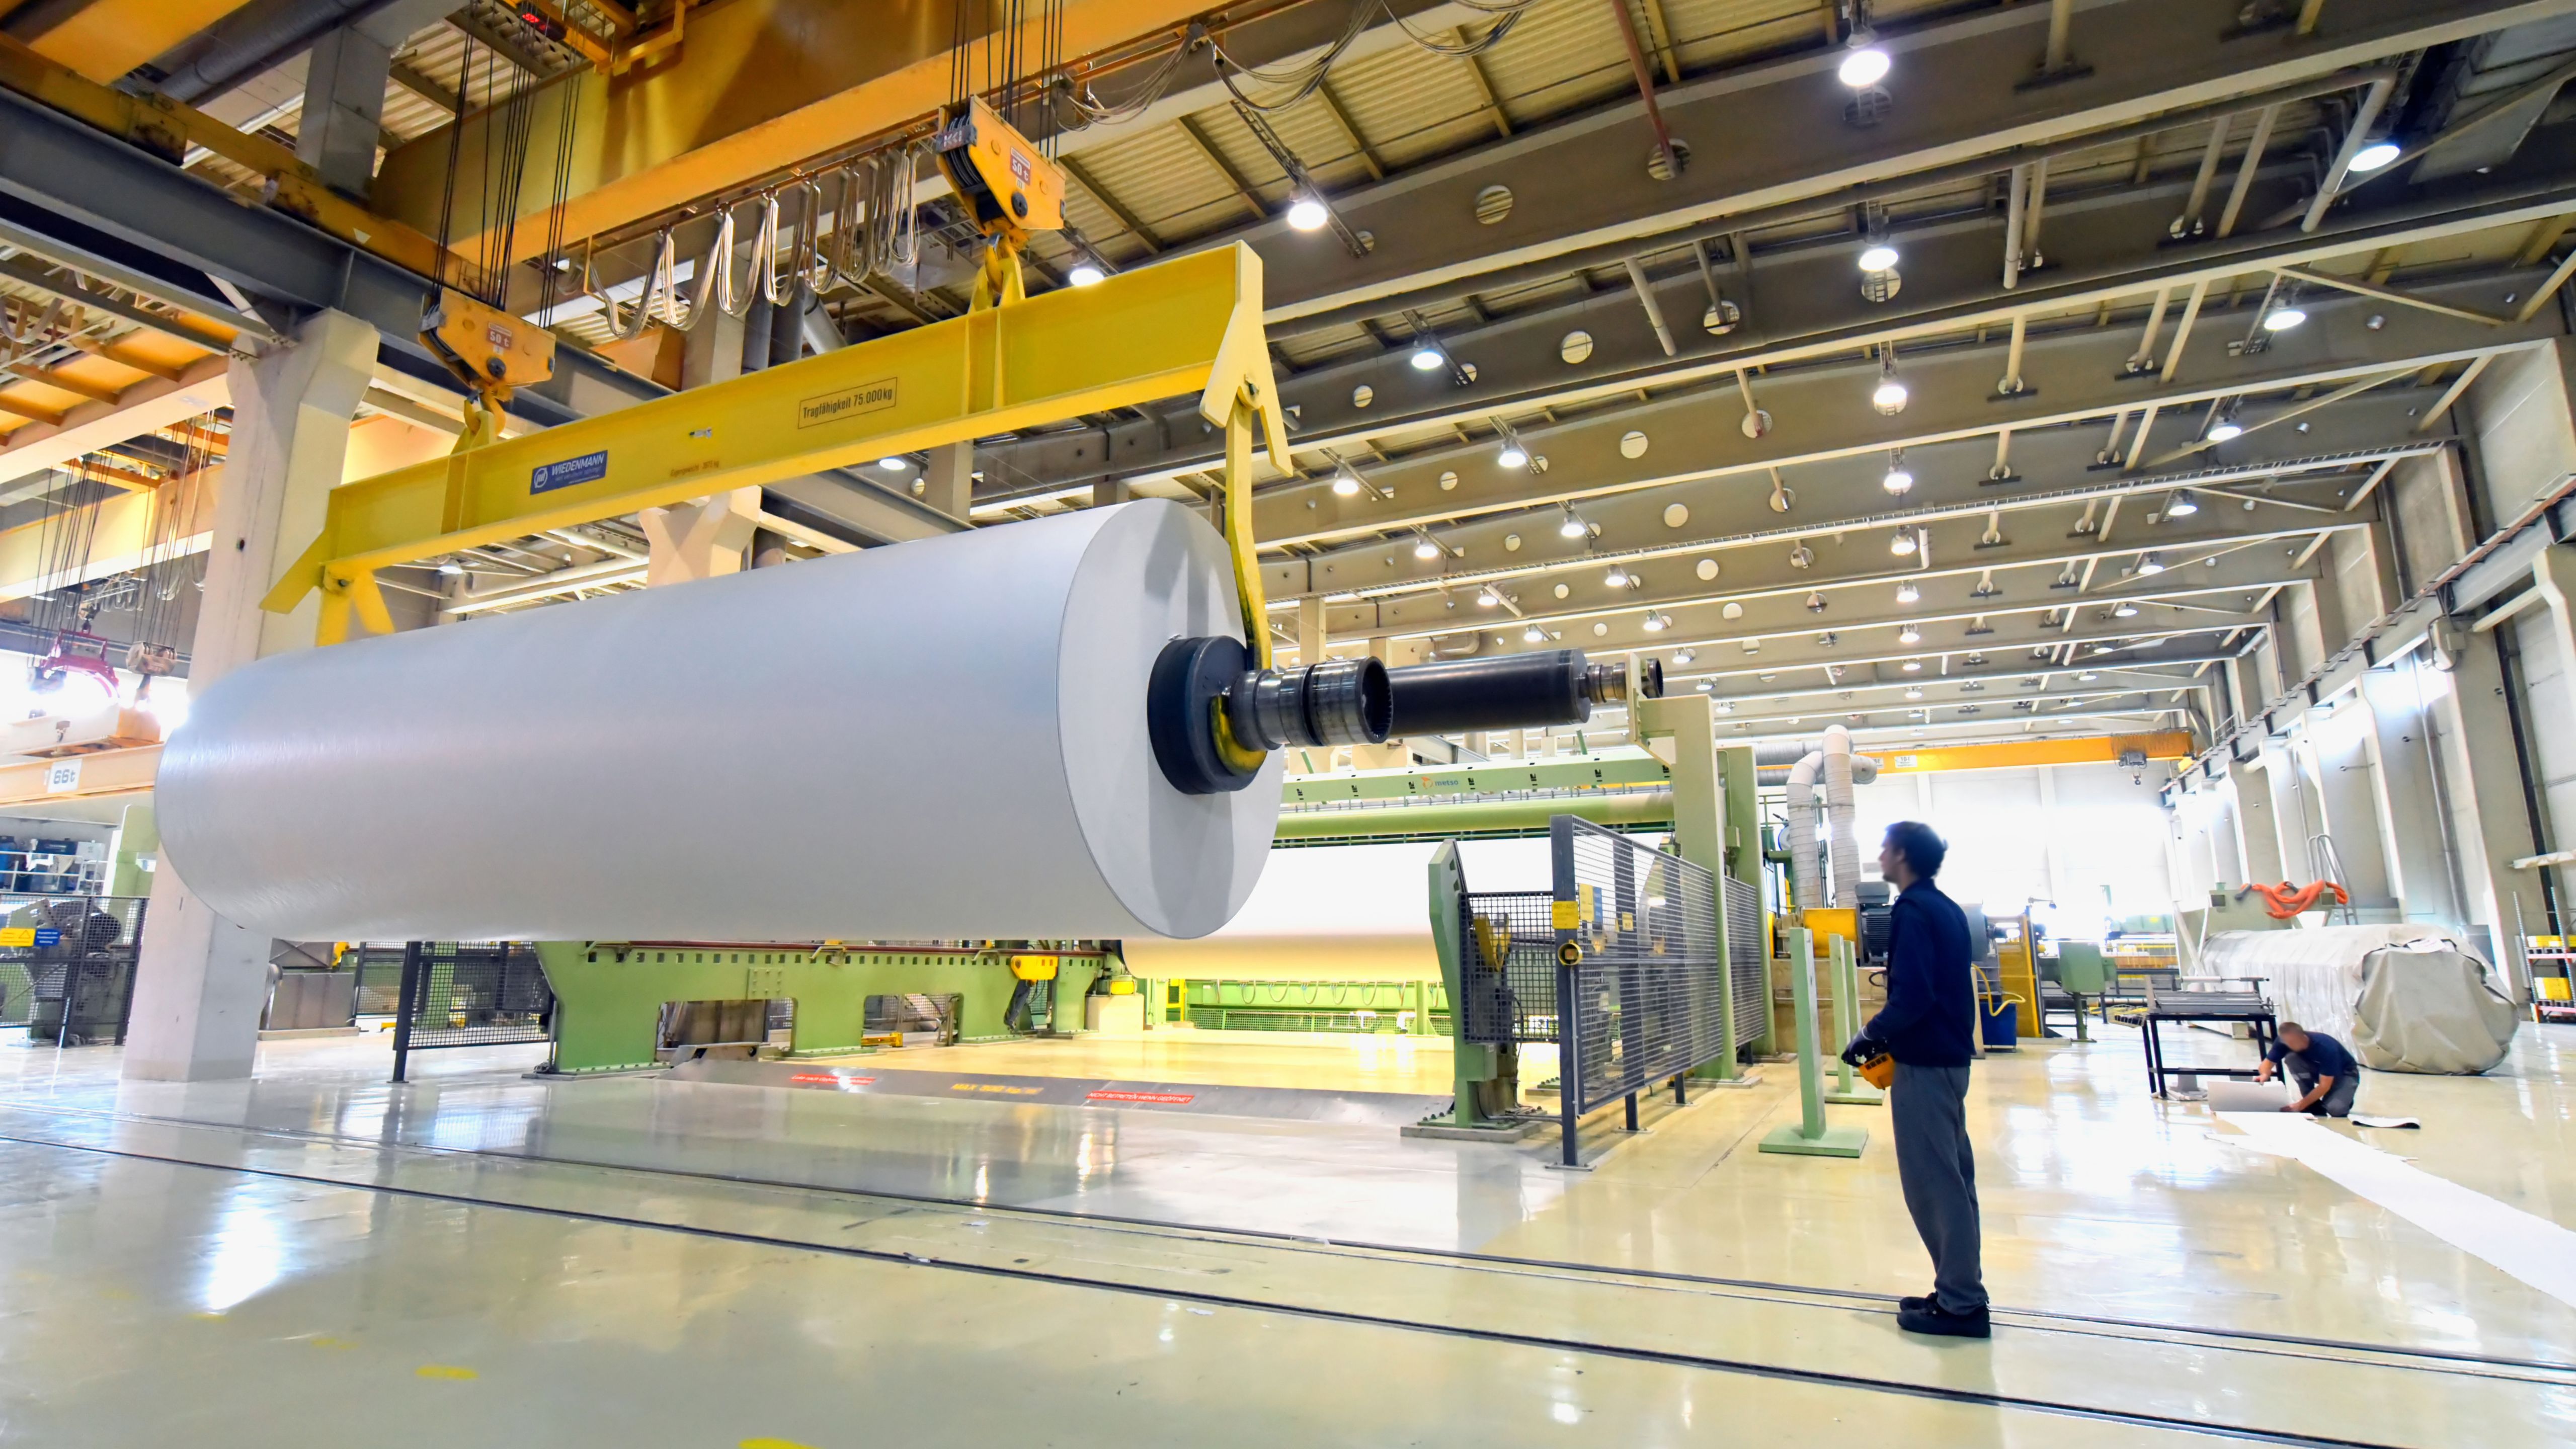 Employee looking at a paper roll on a crane for the production of paper in a modern factory